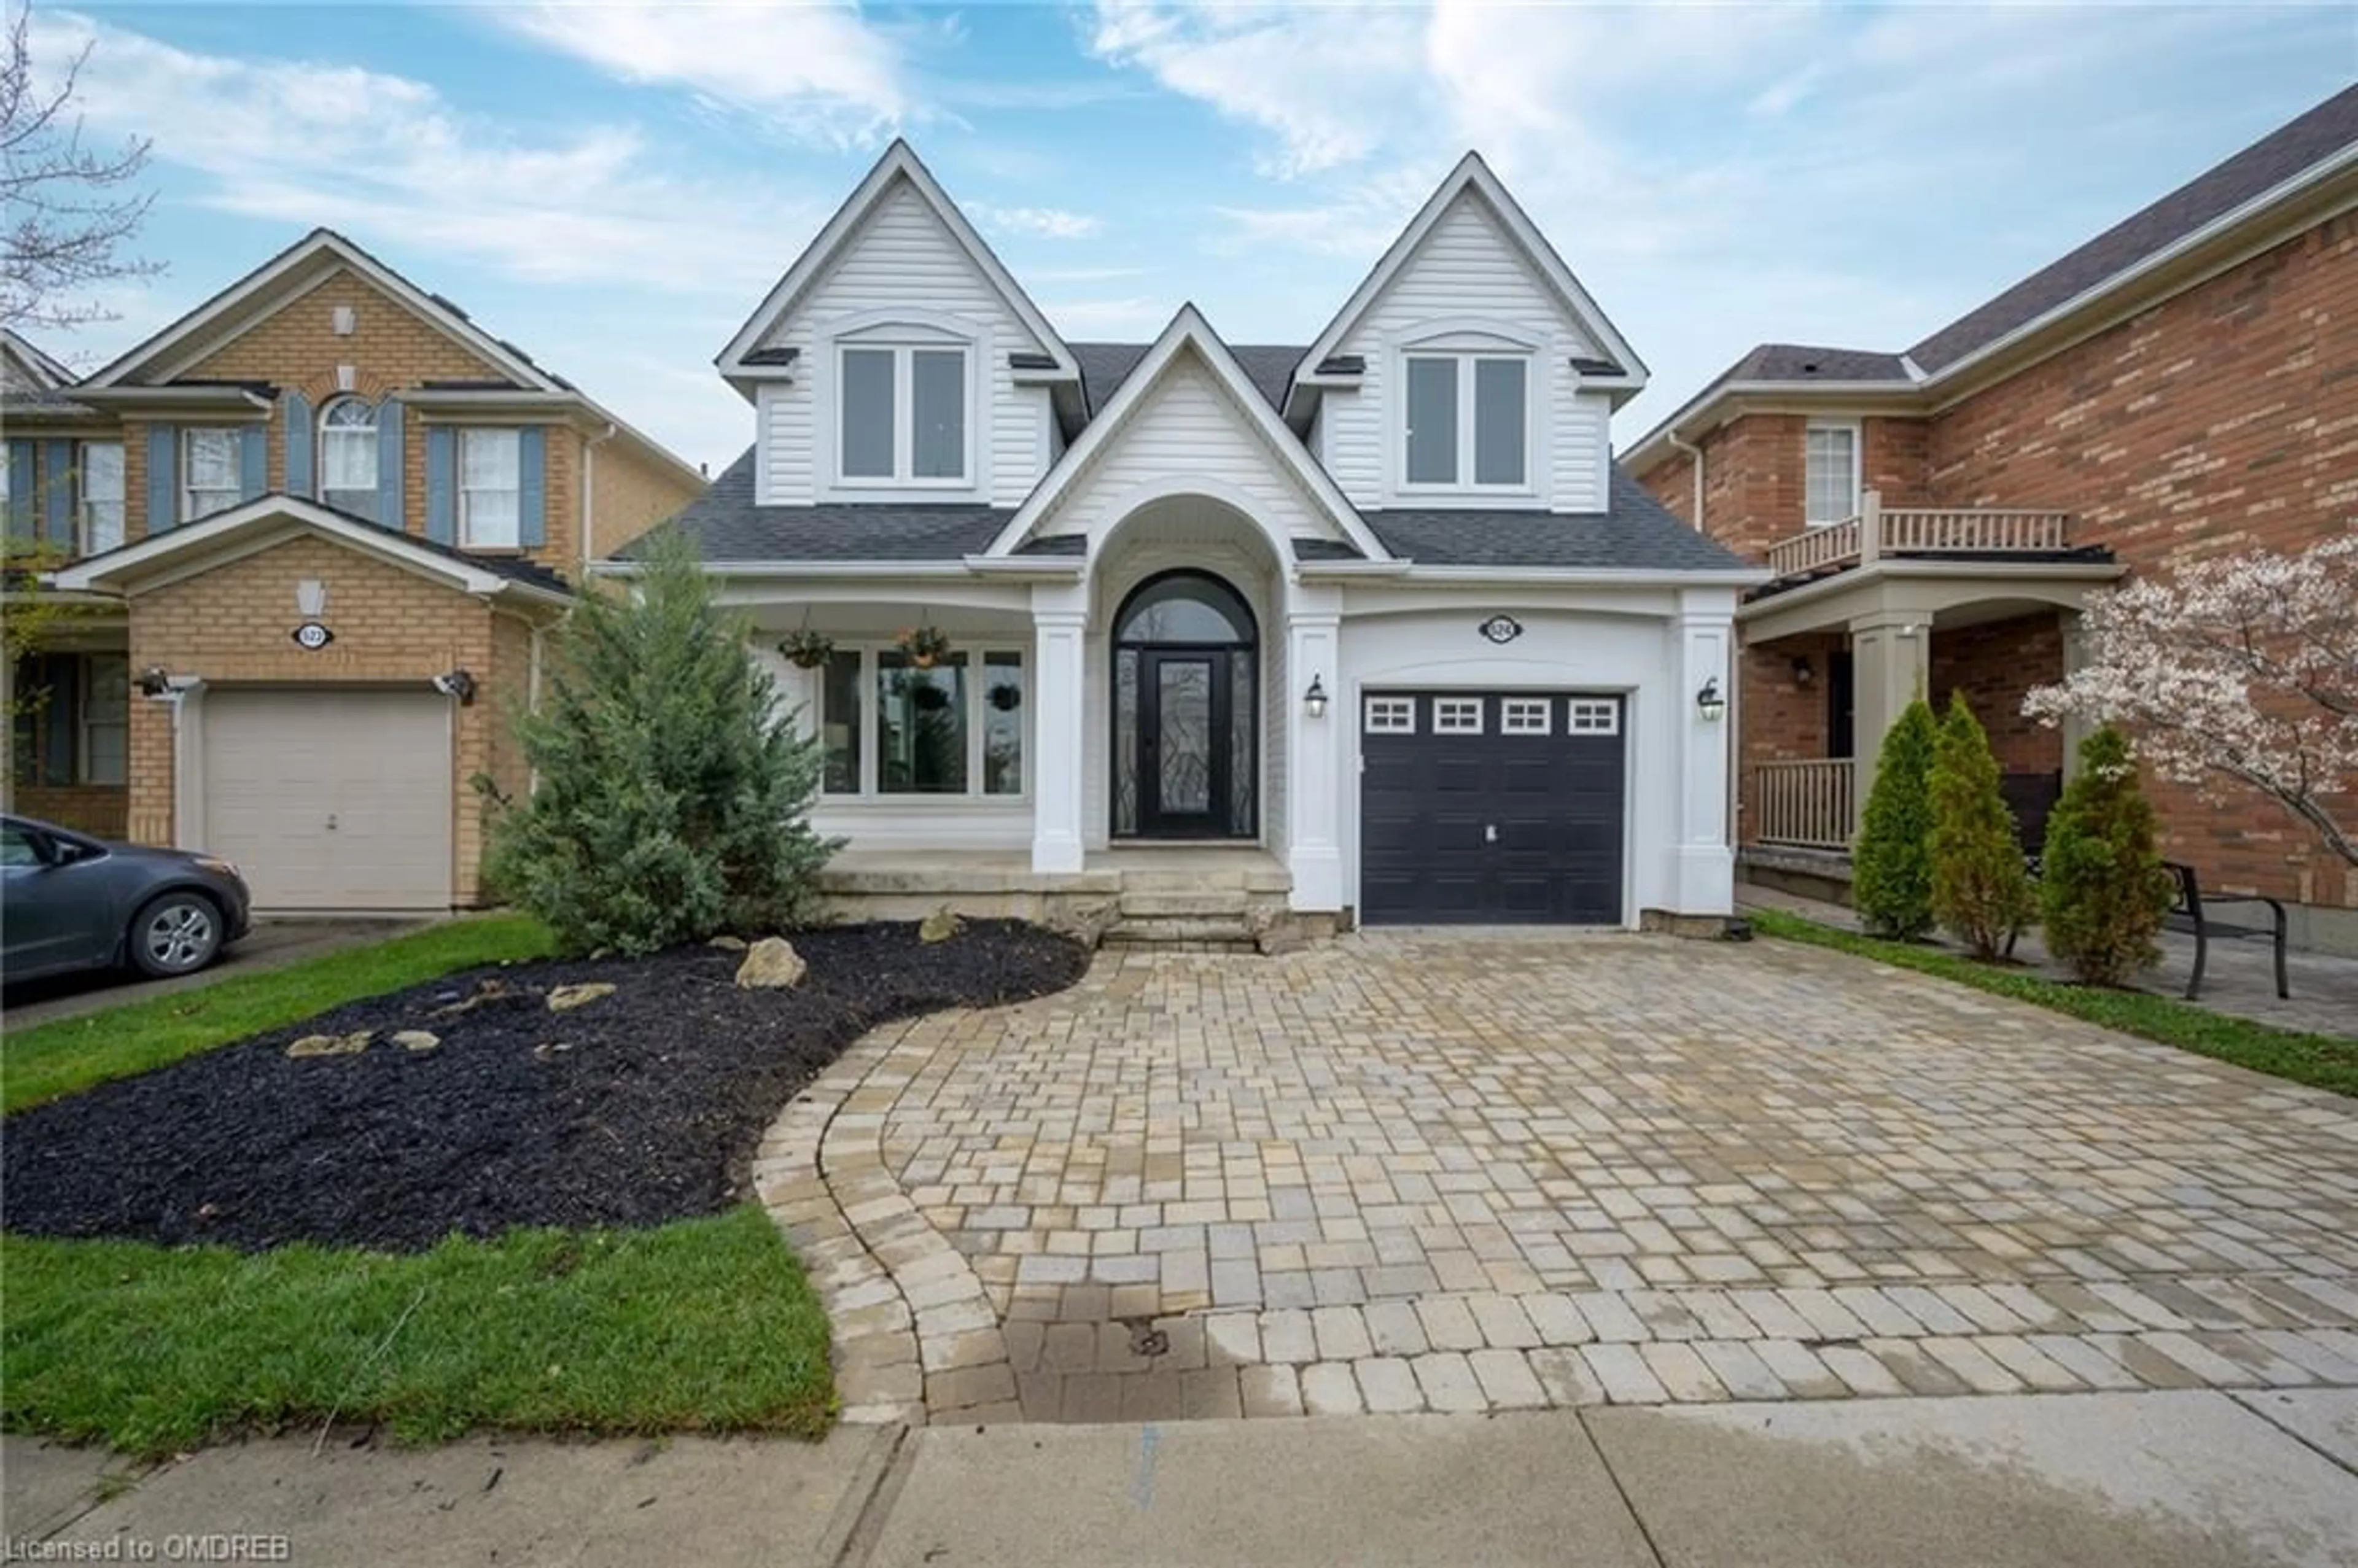 Home with brick exterior material for 524 Caverhill Cres, Milton Ontario L9T 5K2